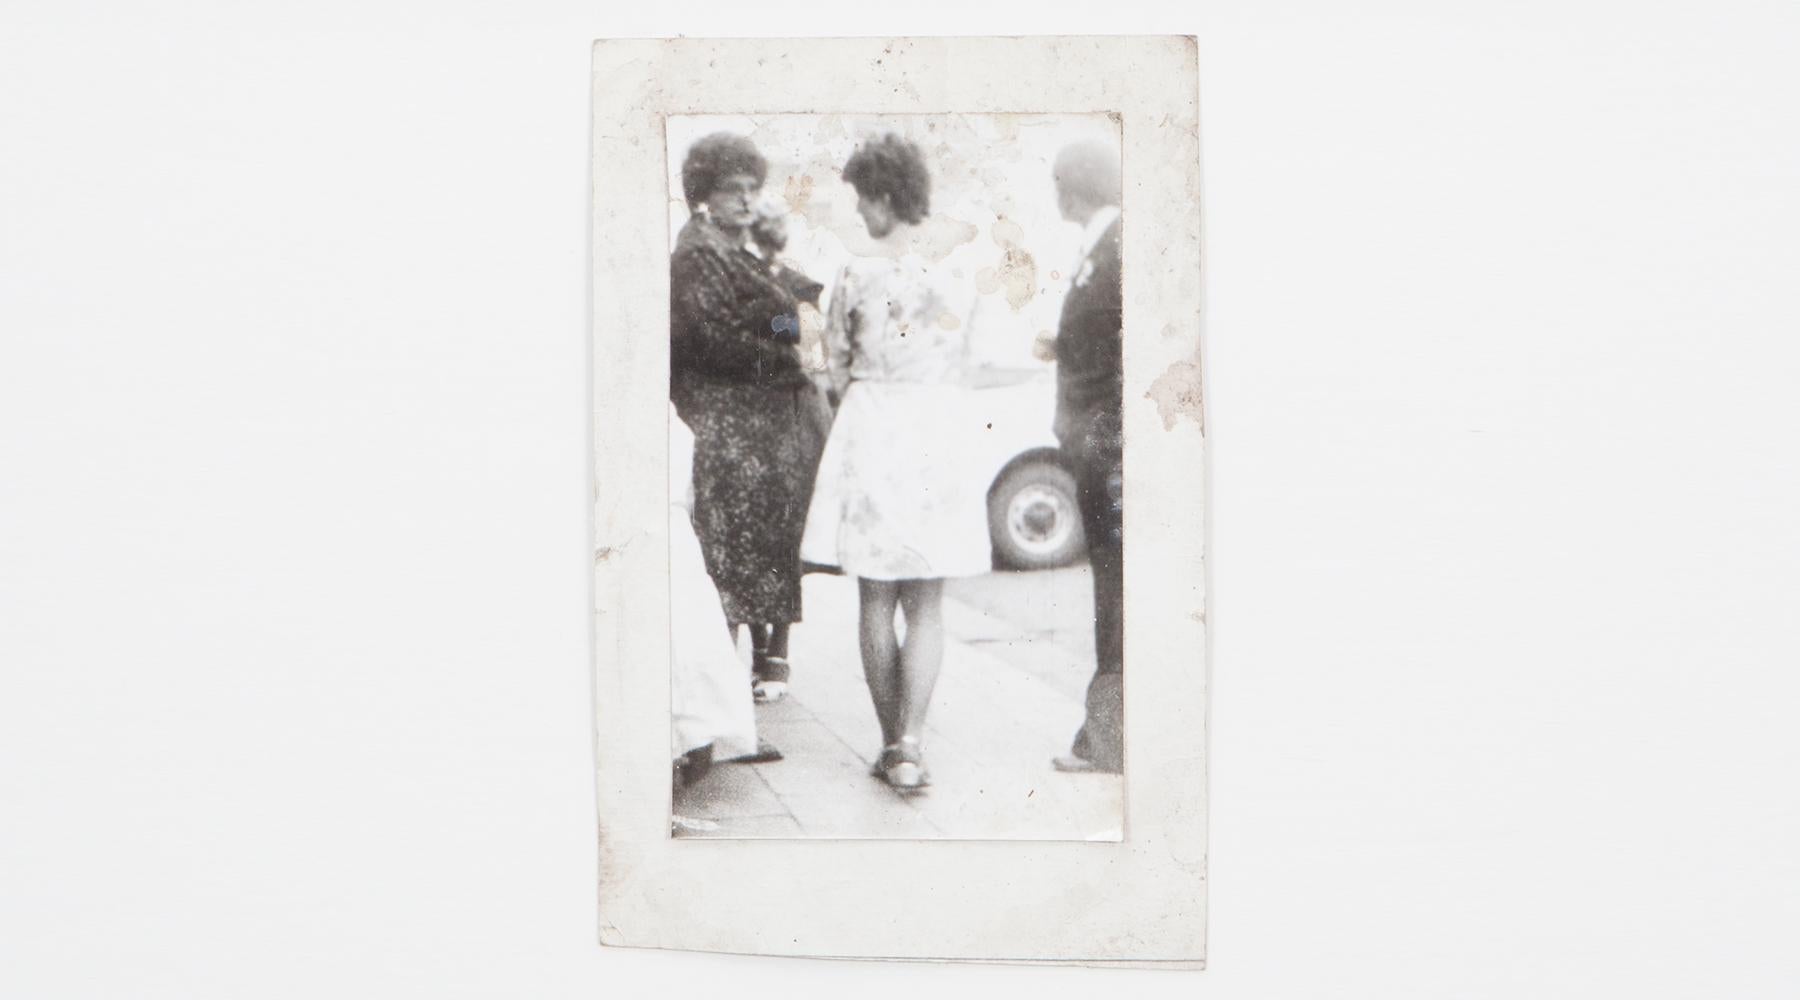 Original Miroslav Tichý b/w Photography from 1970. Unique vintage gelatin silver print. Including black wooden frame in H 35.5 / W 26.5 cm. The picture shows a street scene focused on two women.

Miroslav Tichý was a Czech photographer who